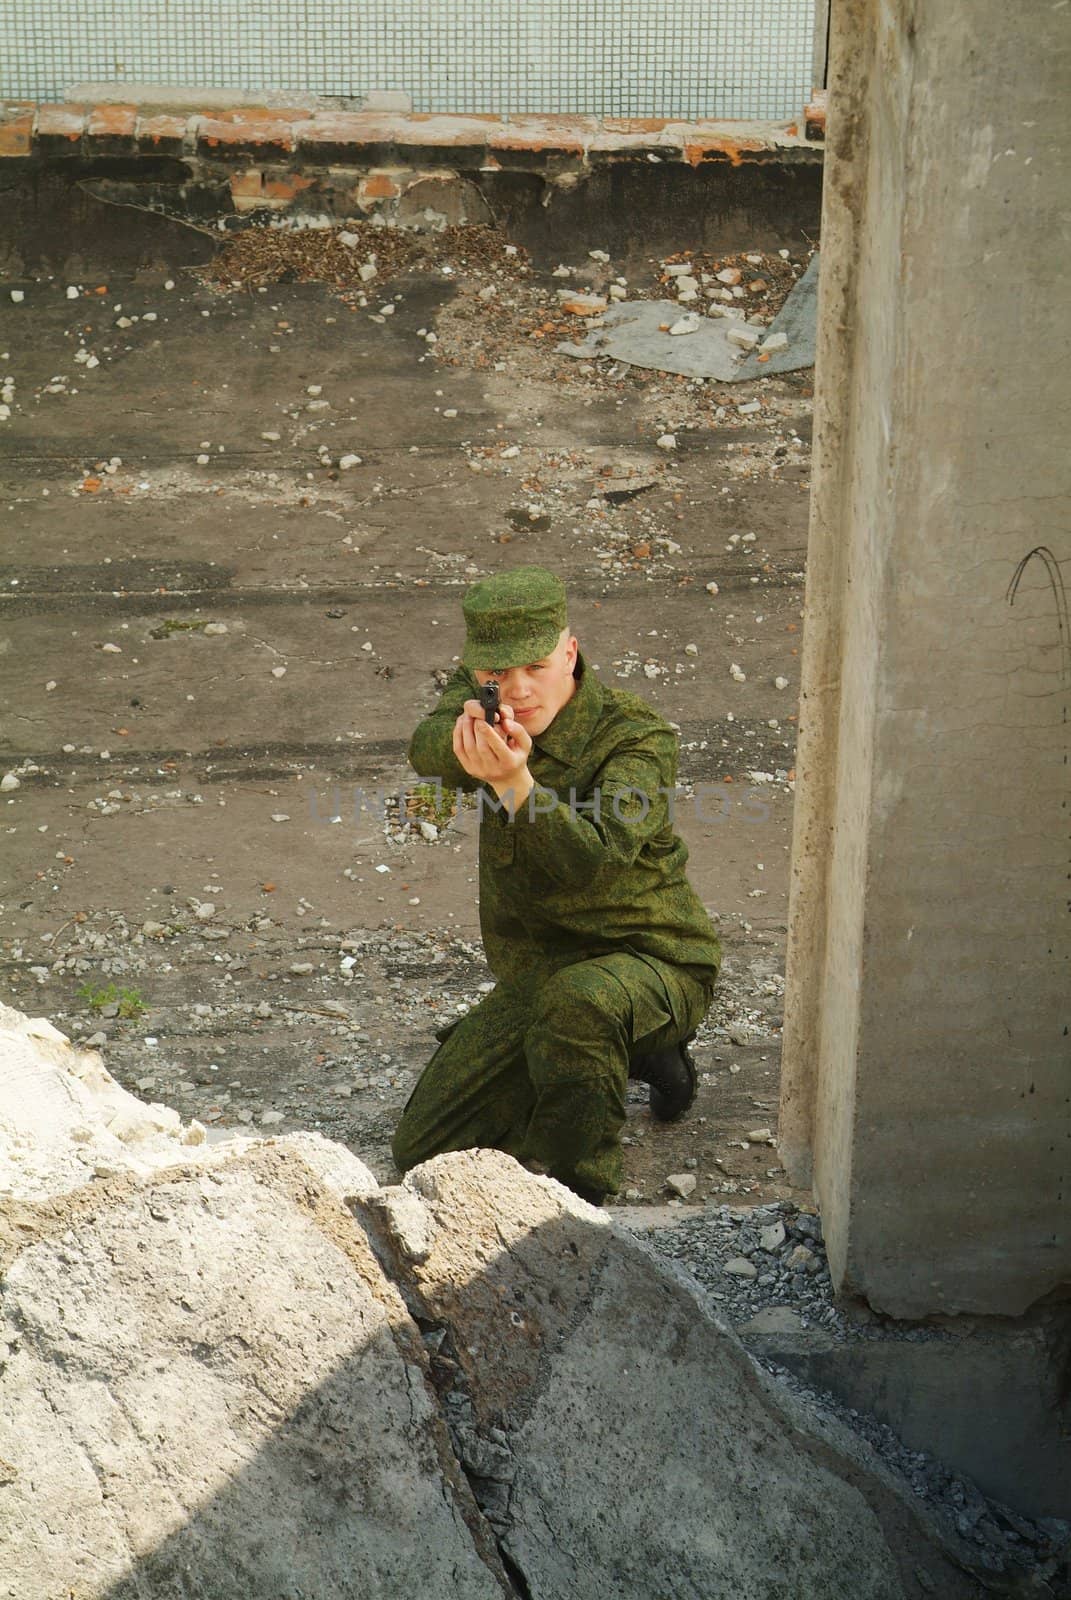 The soldier with a pistol performs antiterrorist operation.